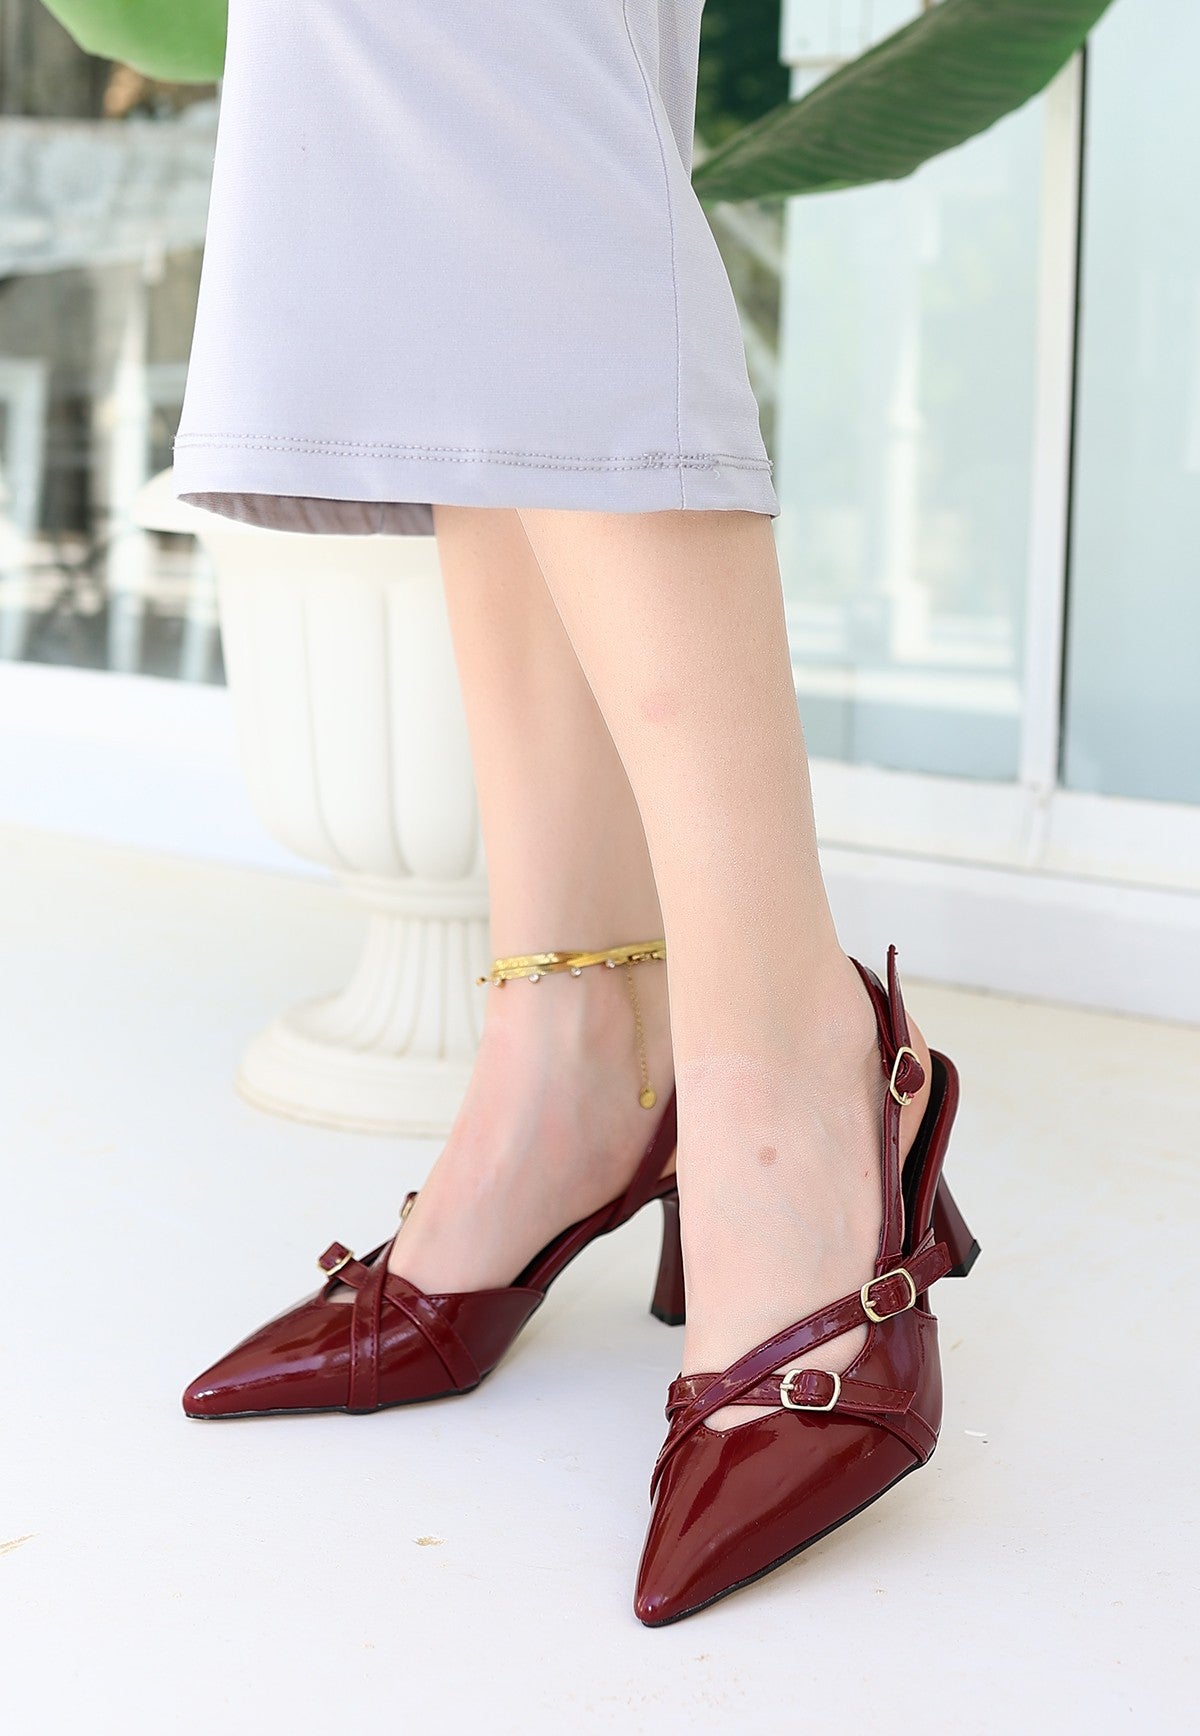 Women's Liwan Claret Red Patent Leather Heeled Shoes - STREETMODE ™